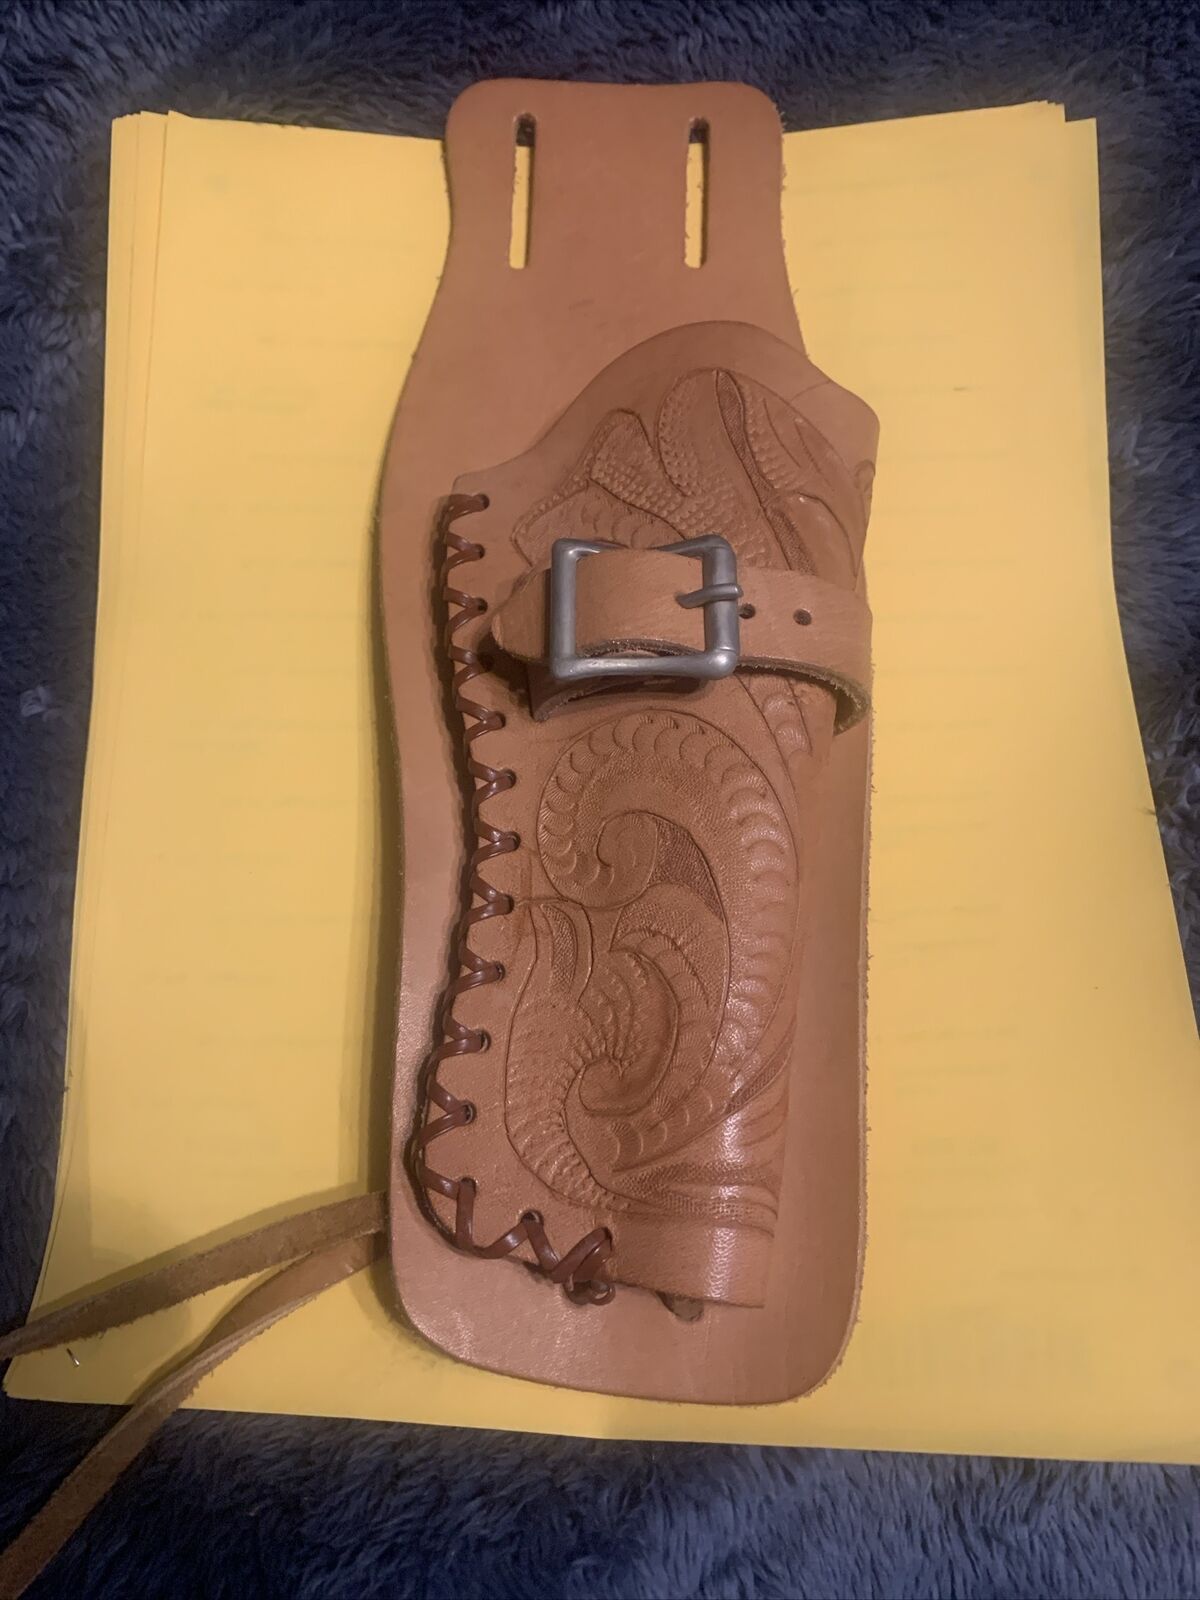 Leather Western Gun Holster Cover . For The Real Cowboy To Tie To Leg .